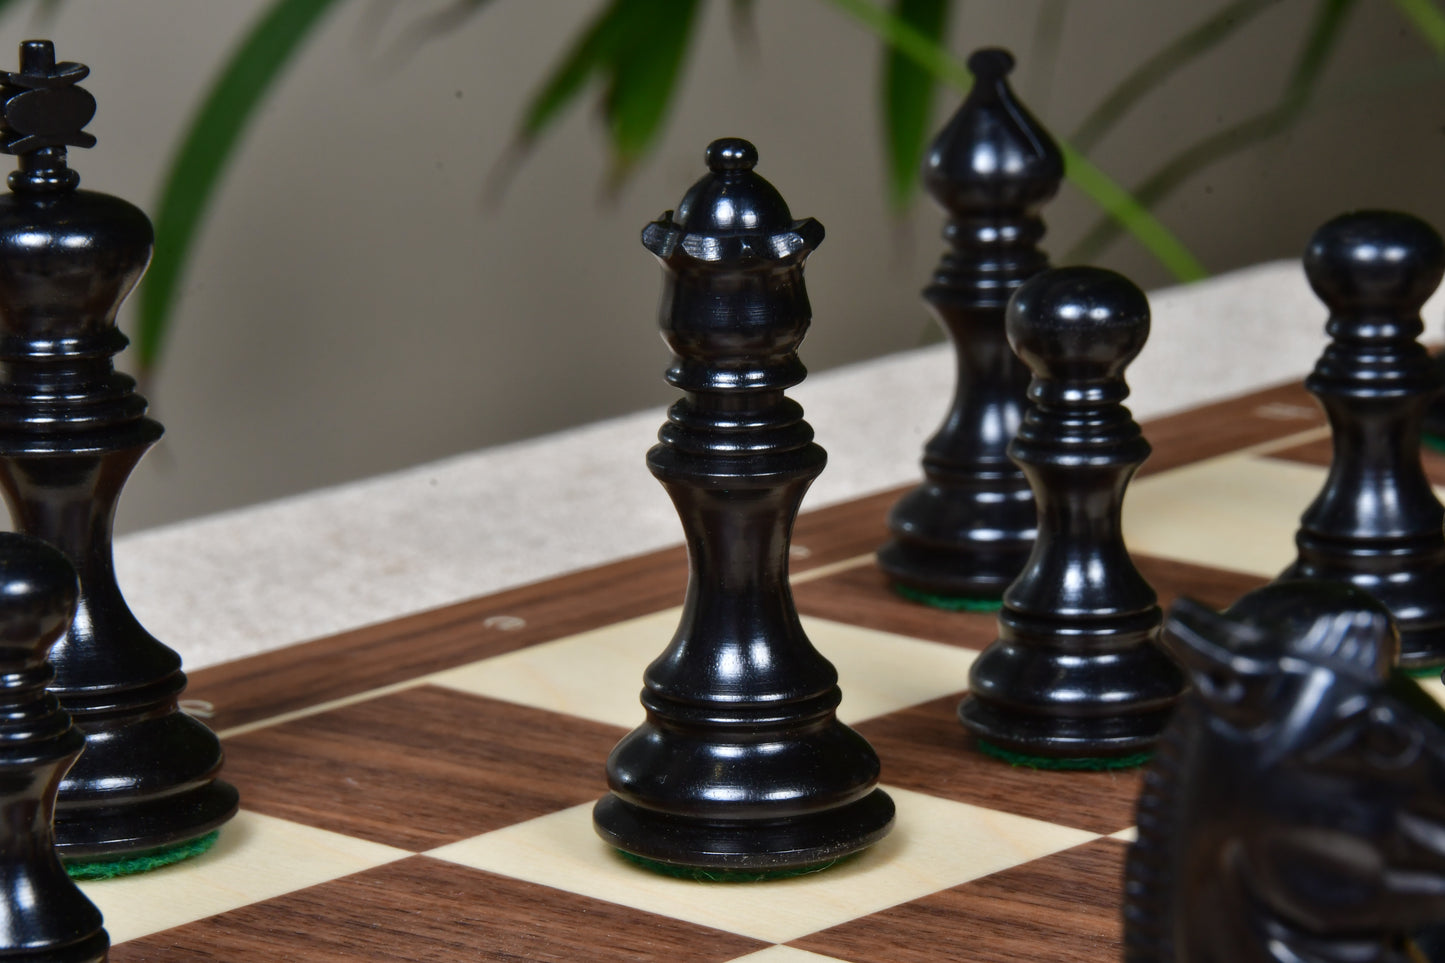 Meghdoot Staunton Series Wooden Chess Pieces in Ebony & Box Wood - 3.2" King